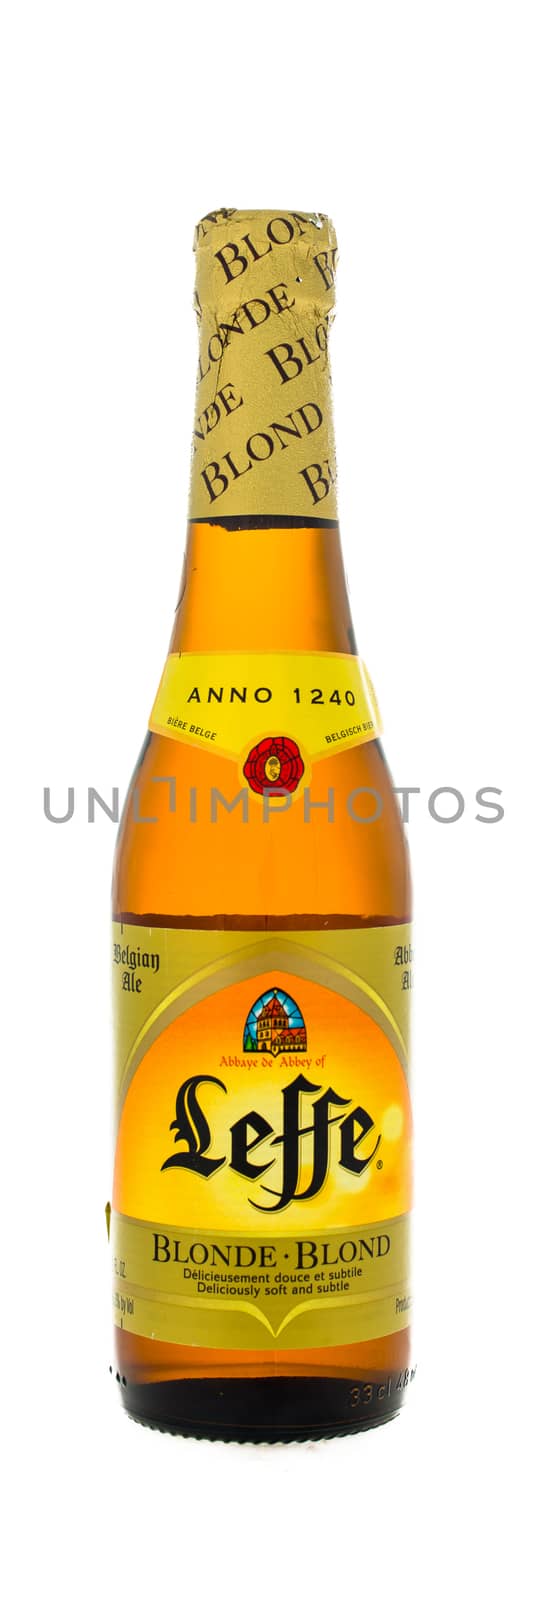 Winneconne, WI - 4 February 2015: Leffe Blond first brewed in 1240 and located in Belgium